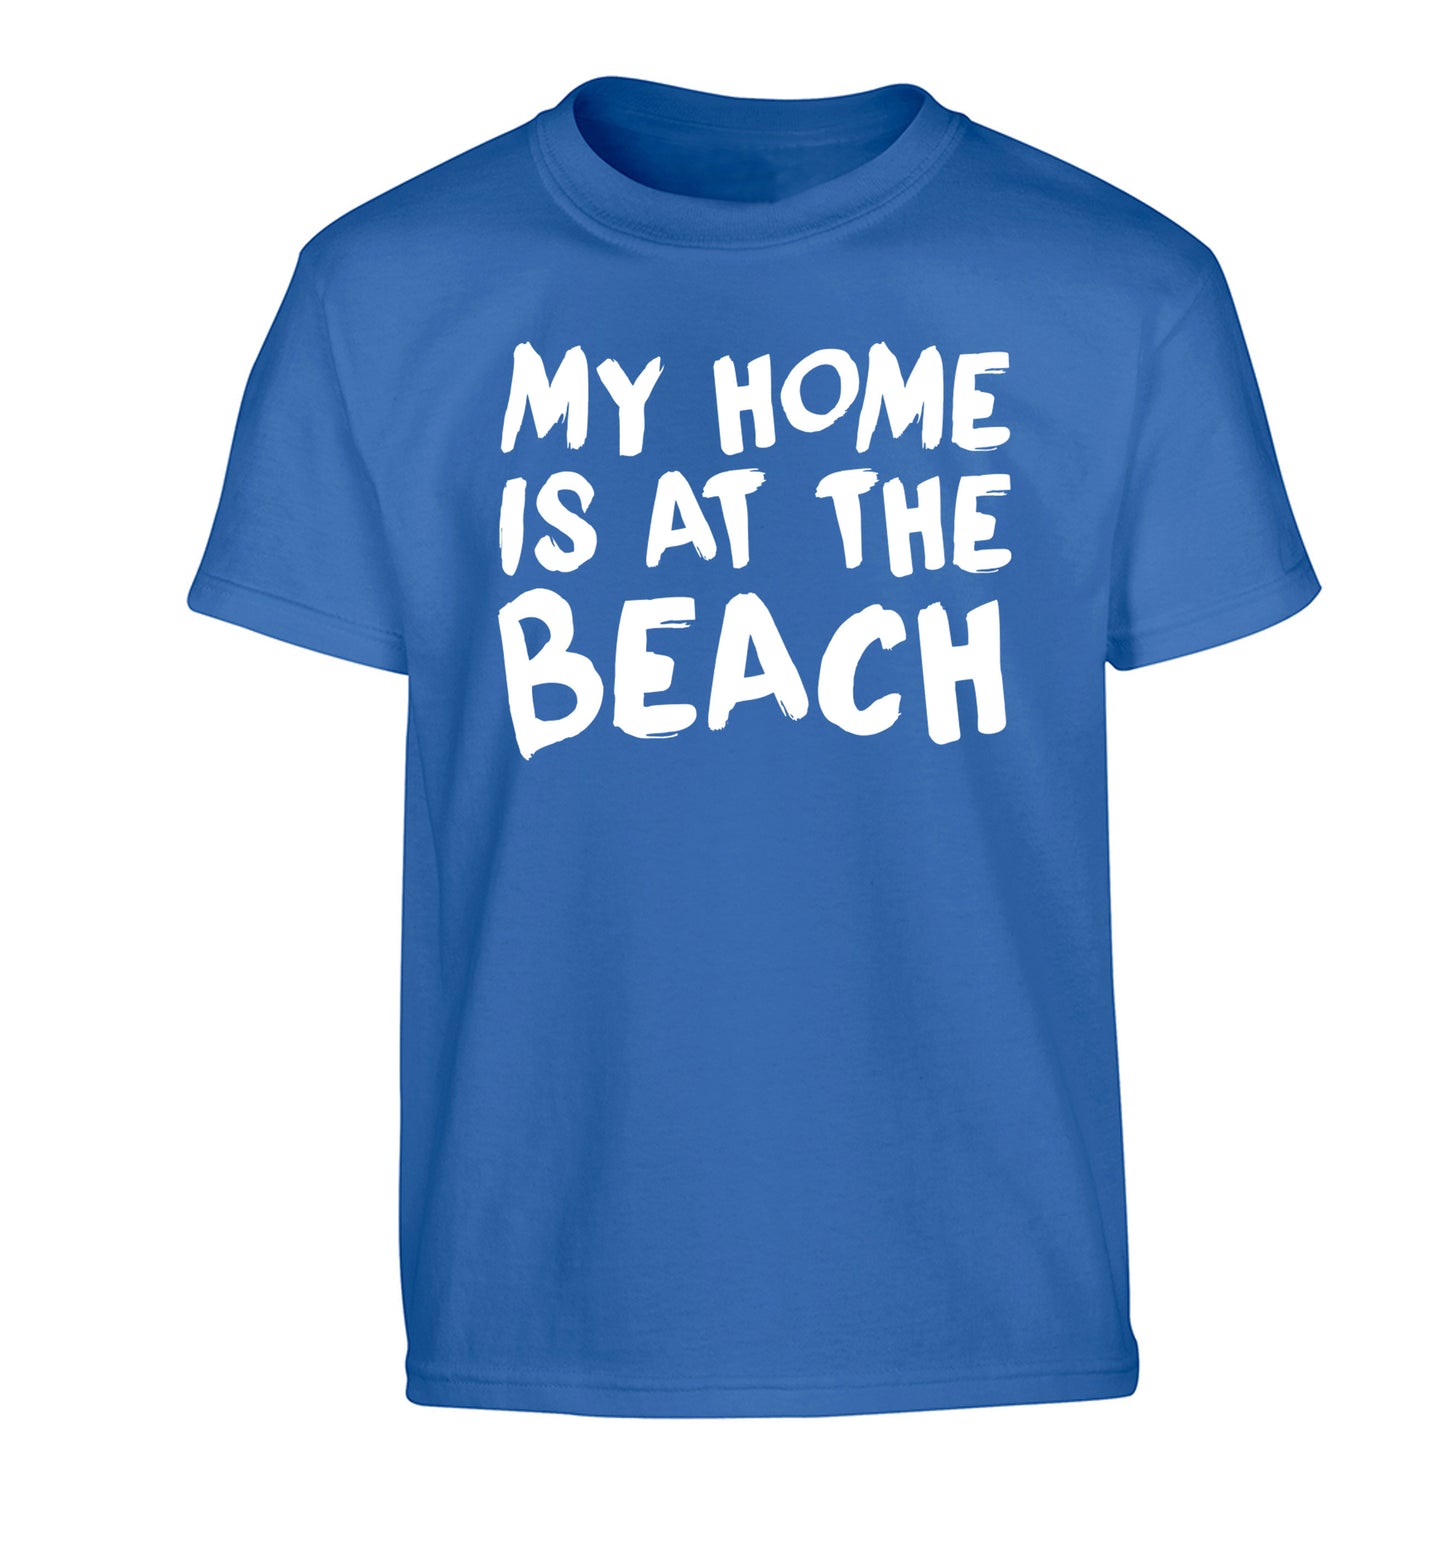 My home is at the beach Children's blue Tshirt 12-14 Years